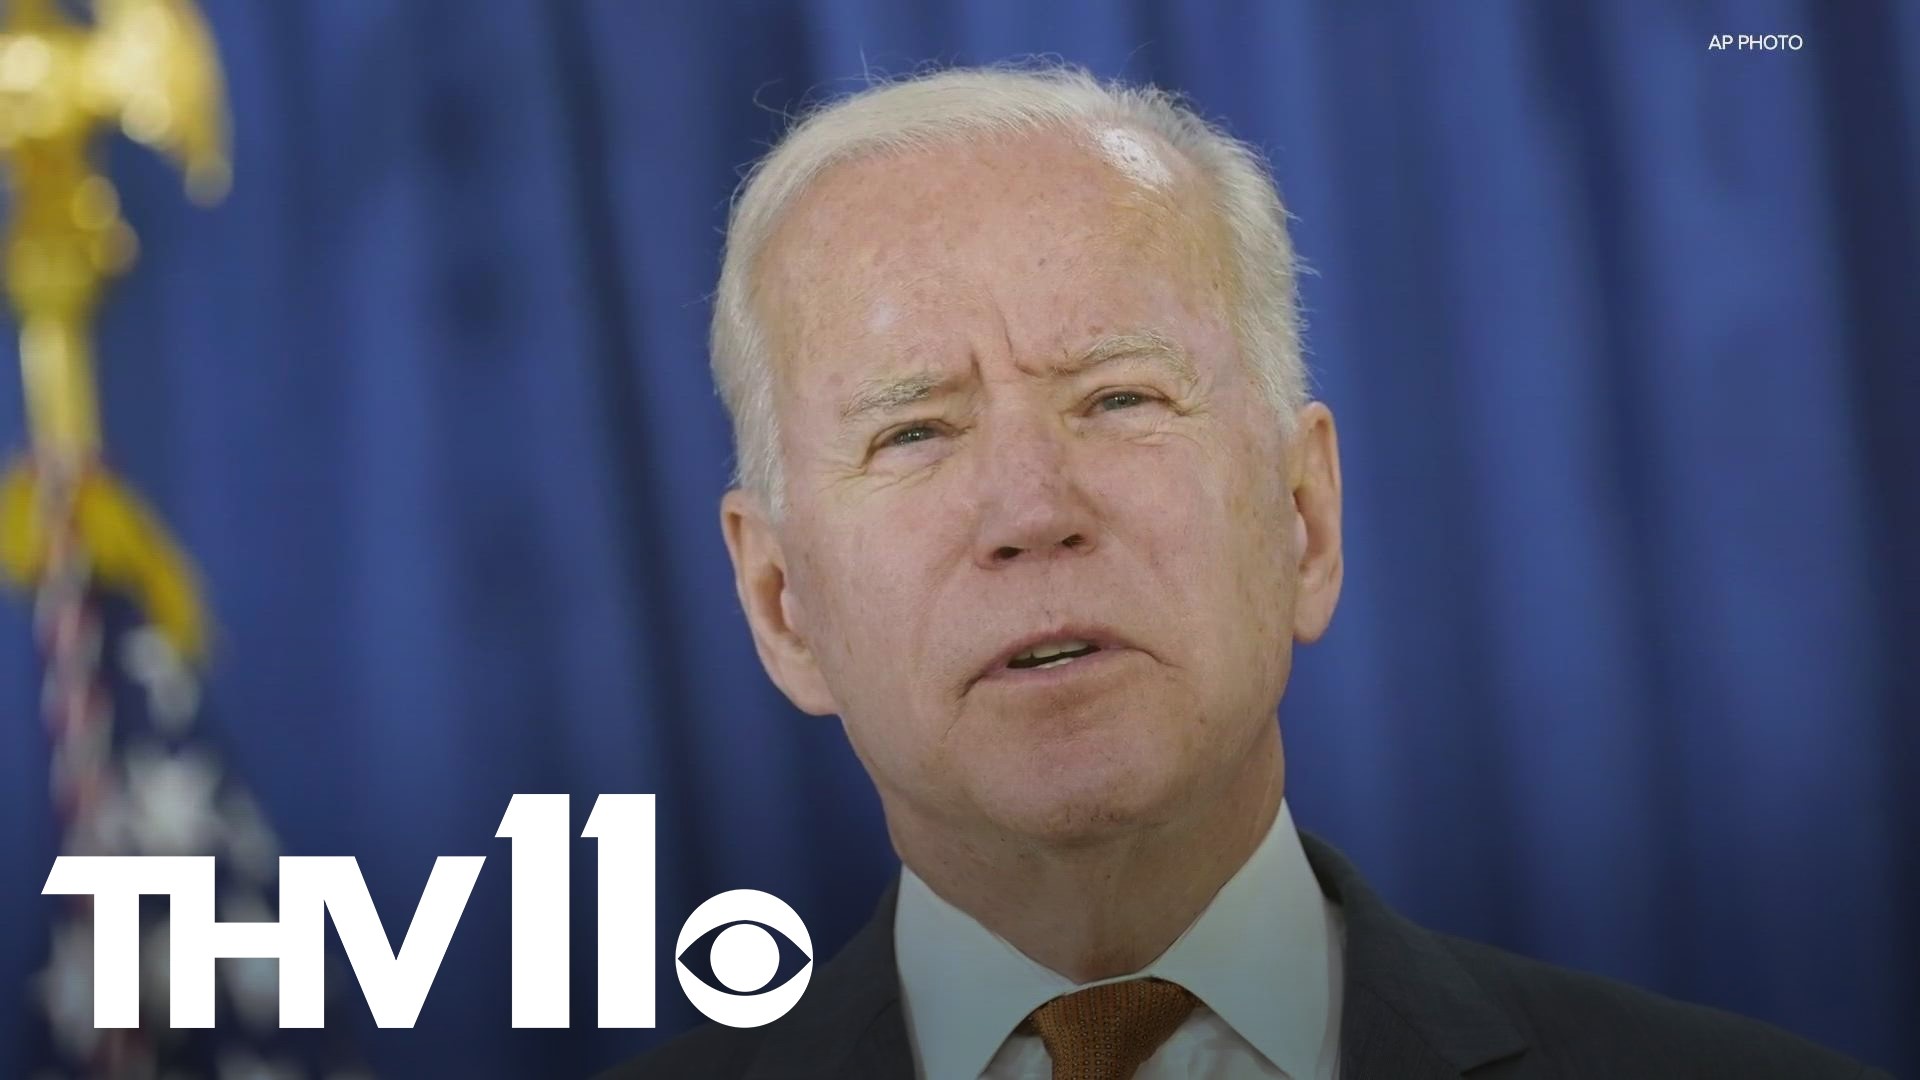 The president's doctor said no further treatment is required, and Biden will continue regular skin screenings as part of his routine health plan.